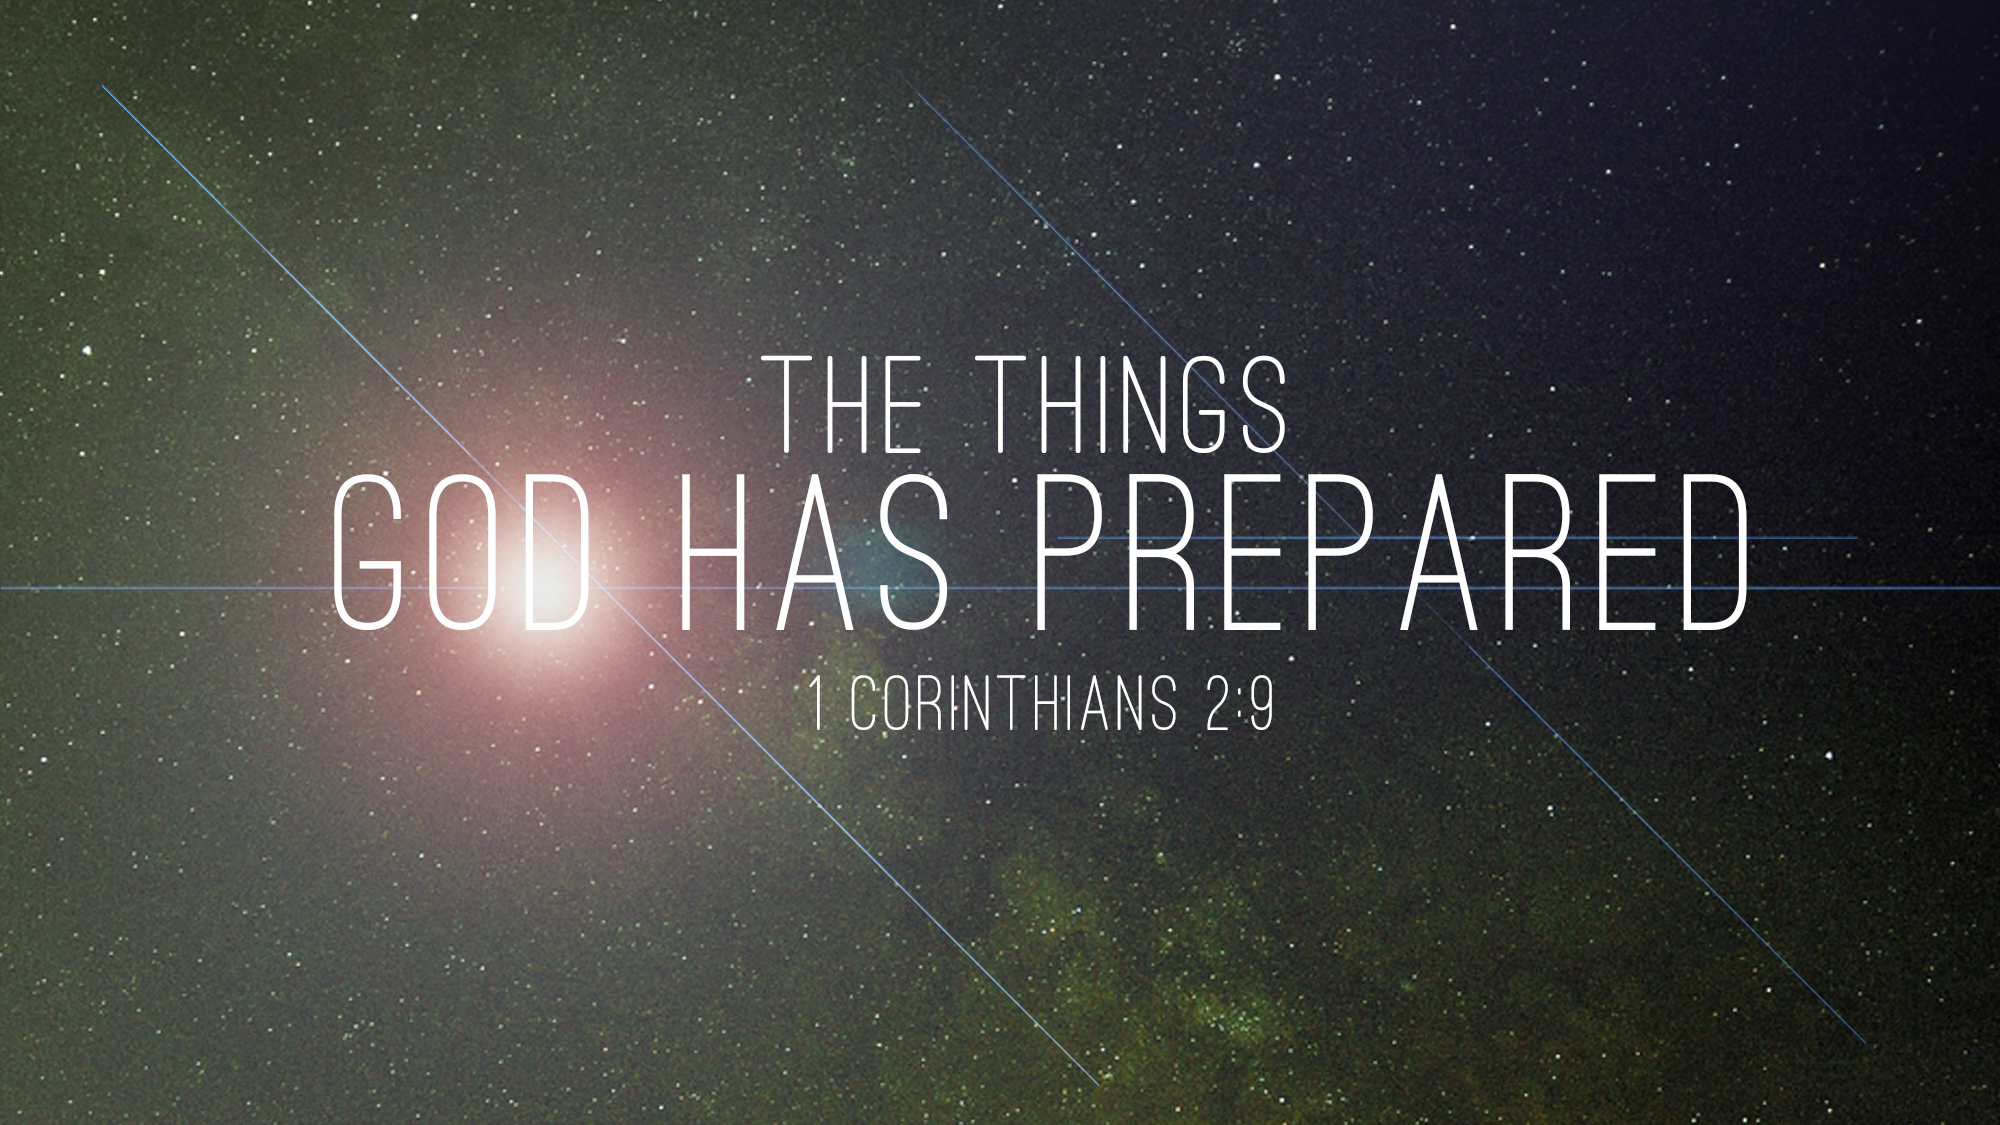 The Things God has Prepared